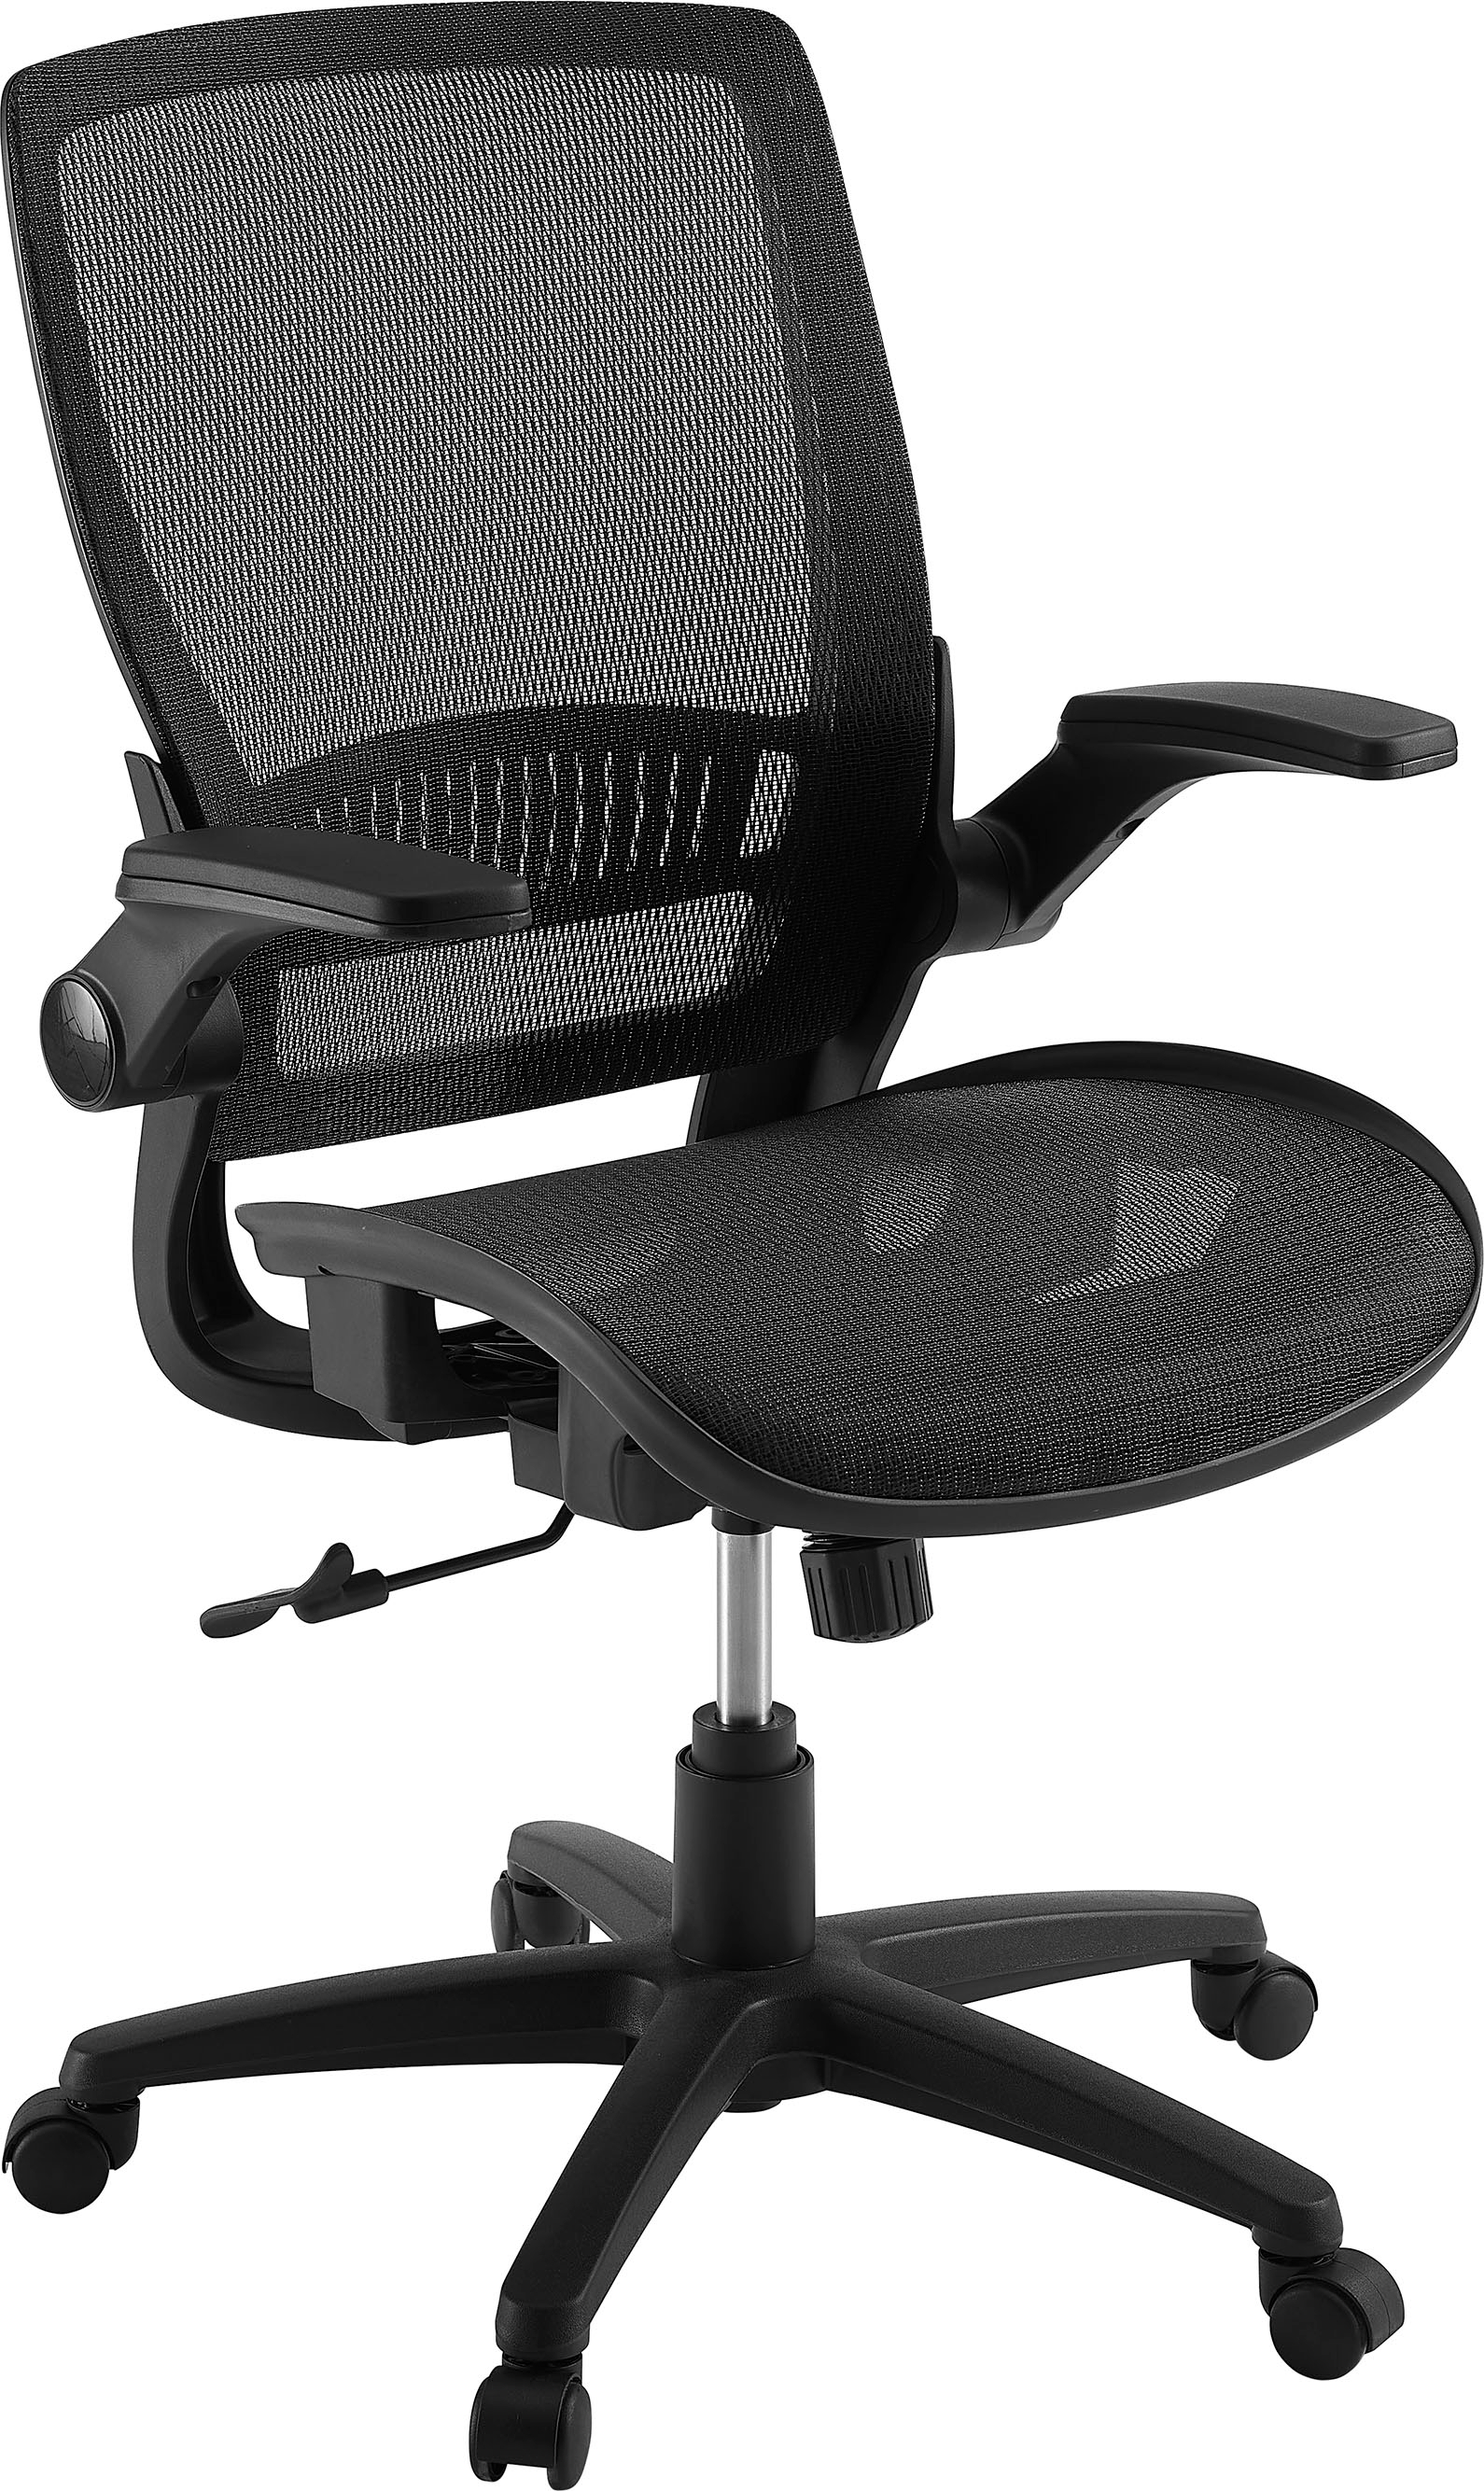 Angle View: Insignia™ - Ergonomic Mesh Office Chair with Adjustable Arms - Black